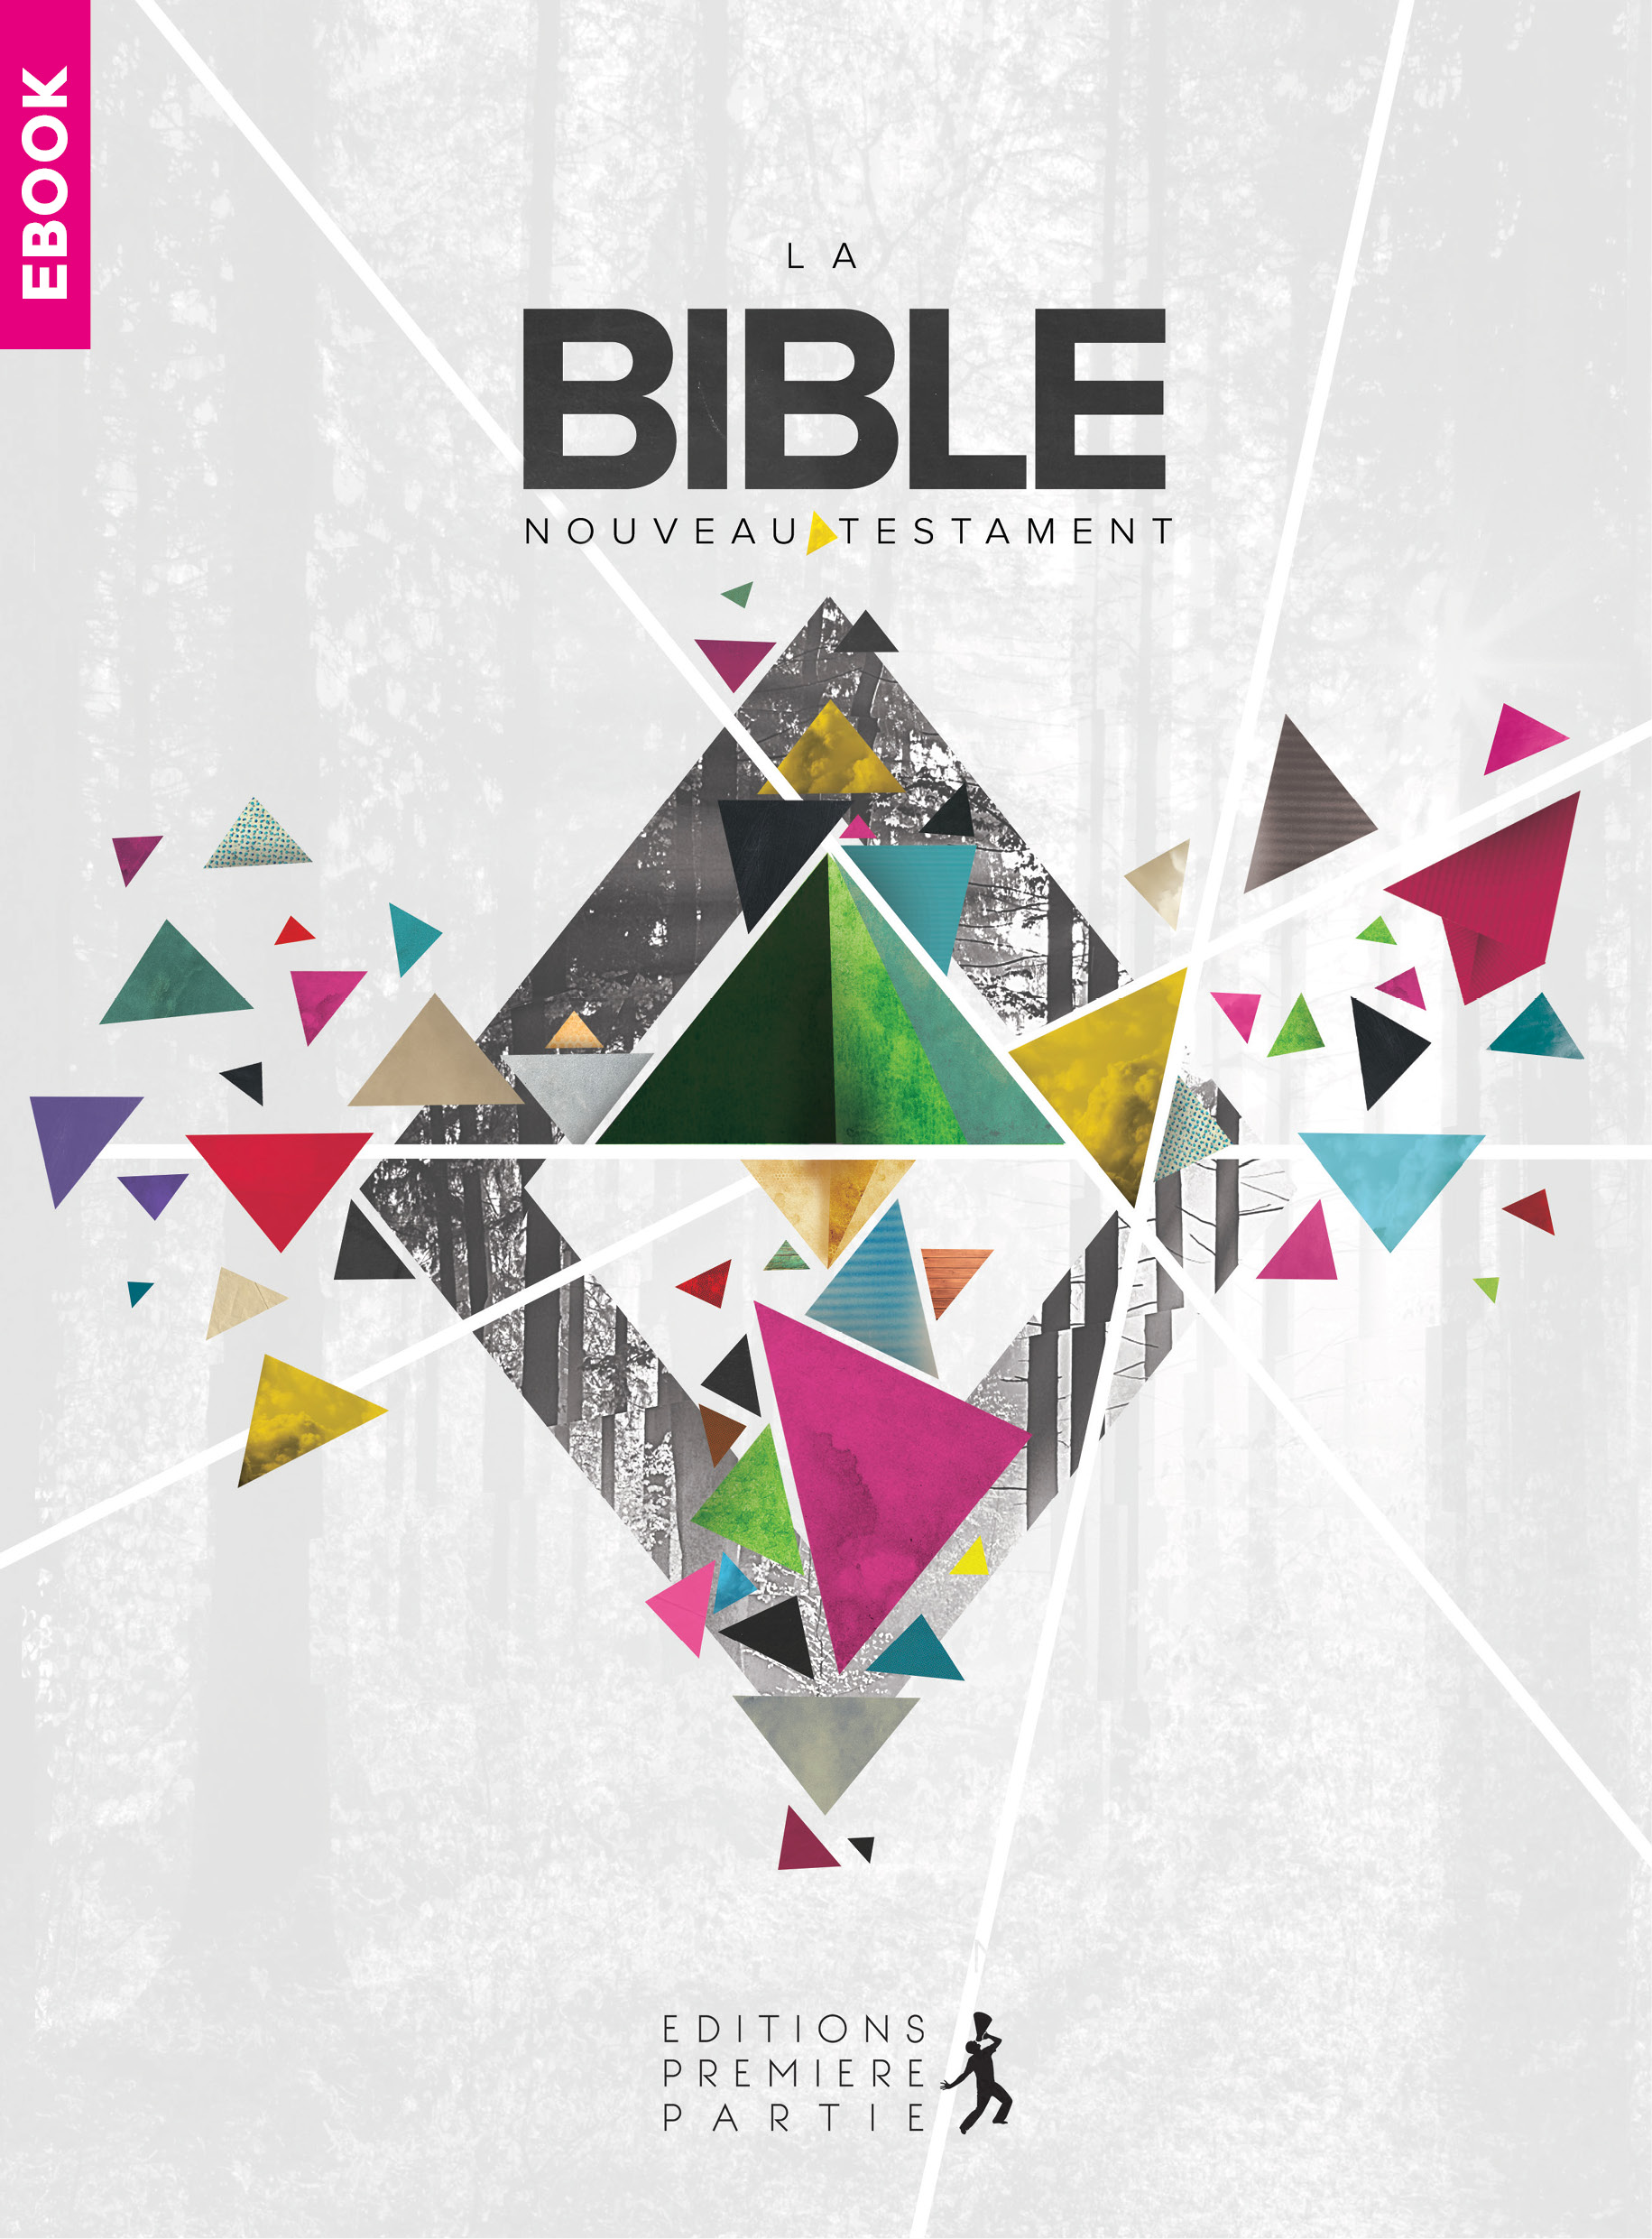 Couverture ebook Bible Mag